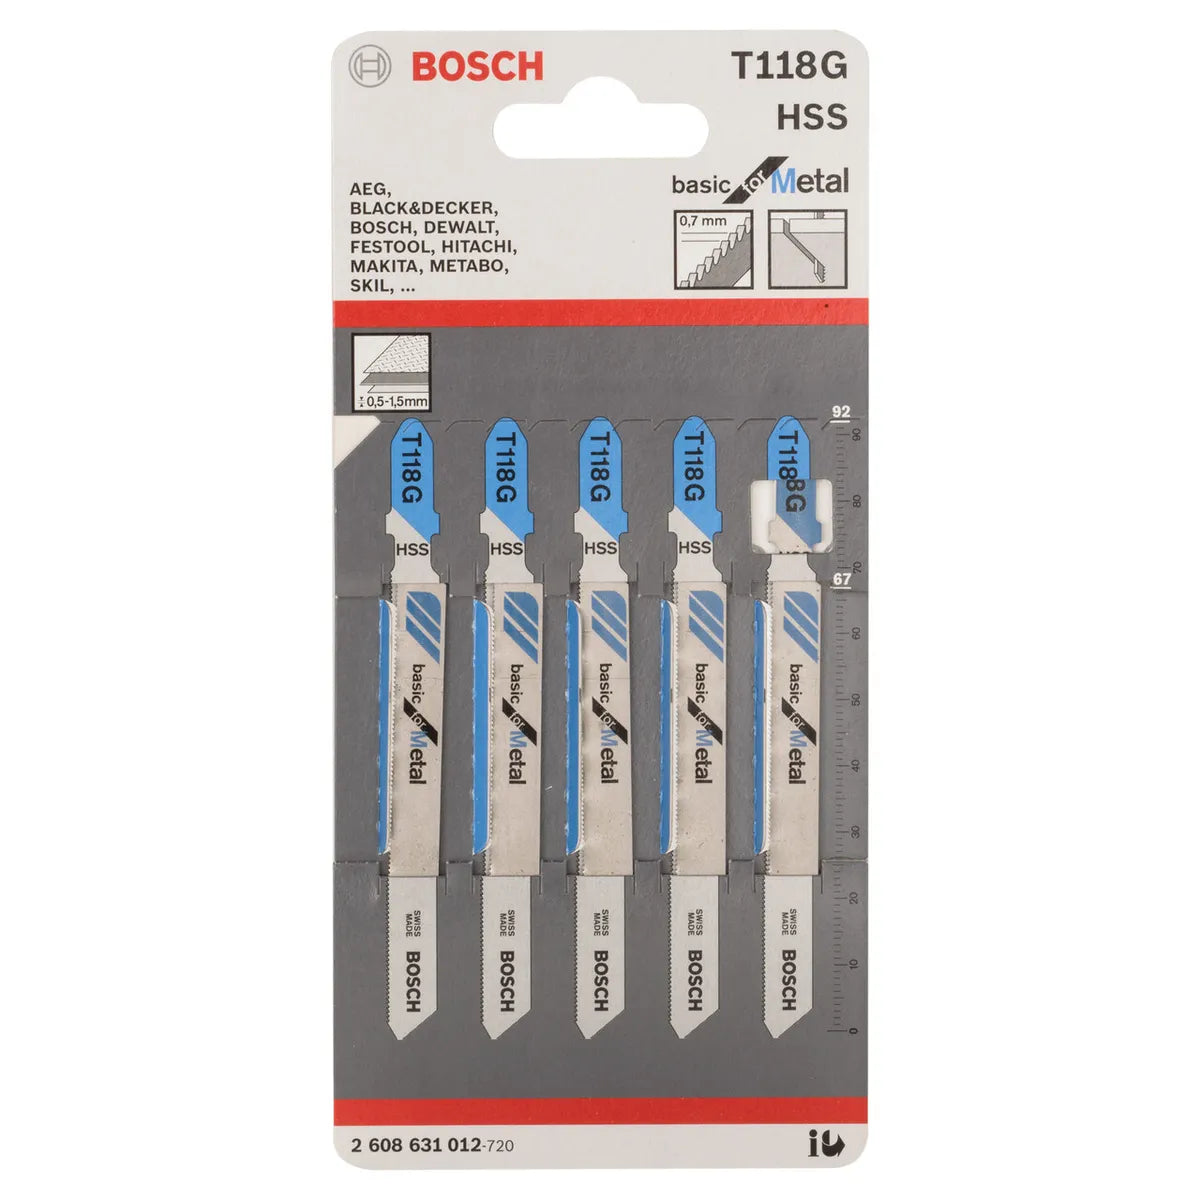 Bosch Jigsaw Blades T 118 G Basic for Metal 5 Pack 2608631012 Power Tool Services